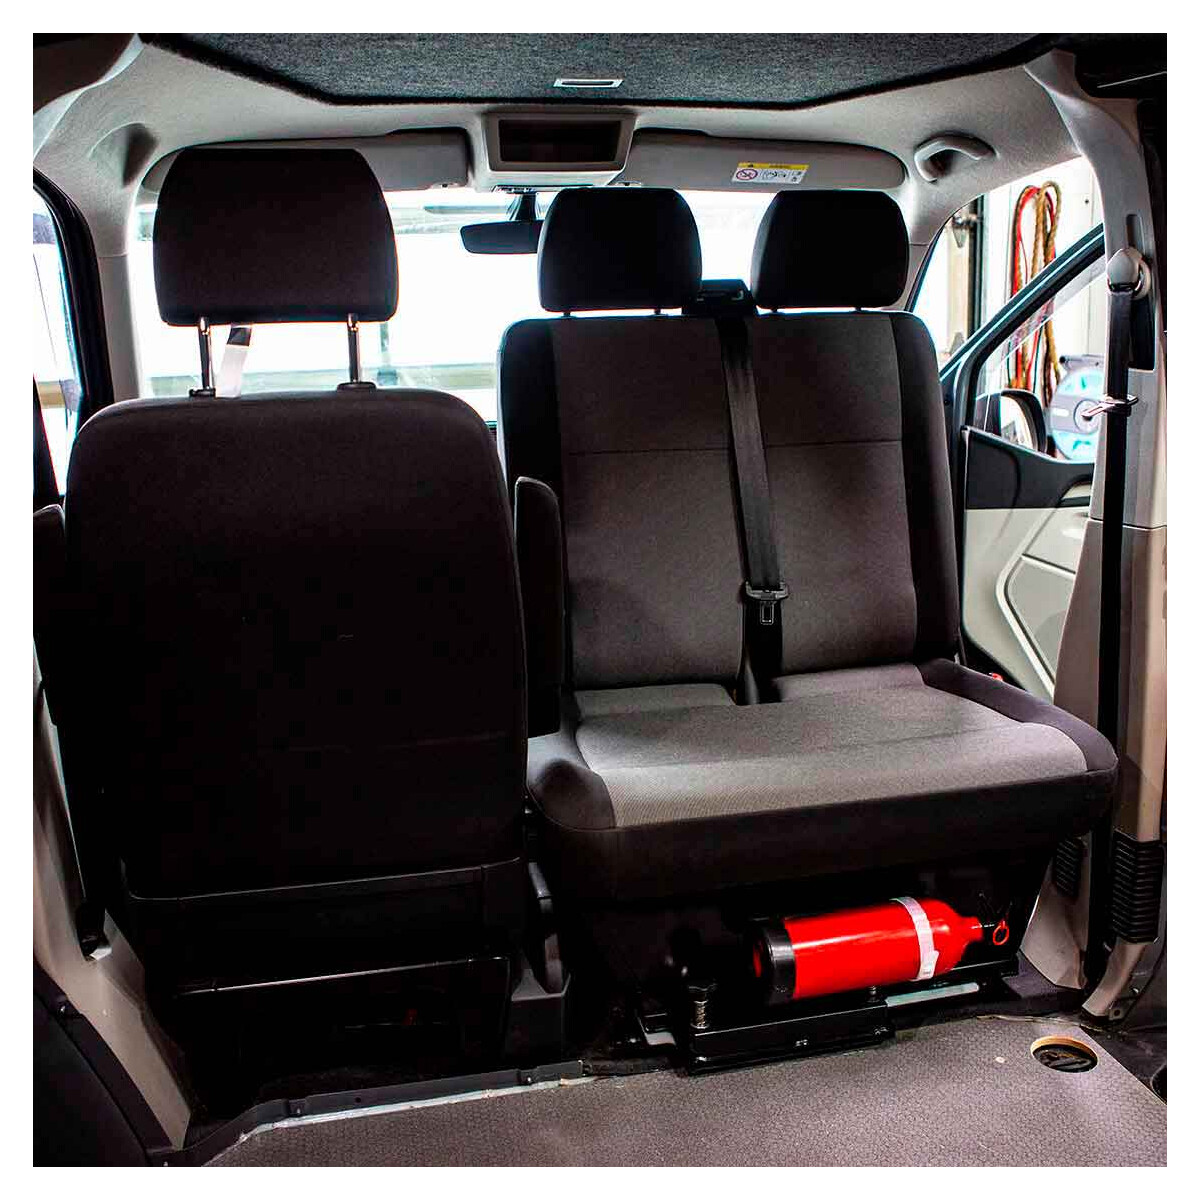 t5t6 swivel seat base for double front seats tÜvapproved